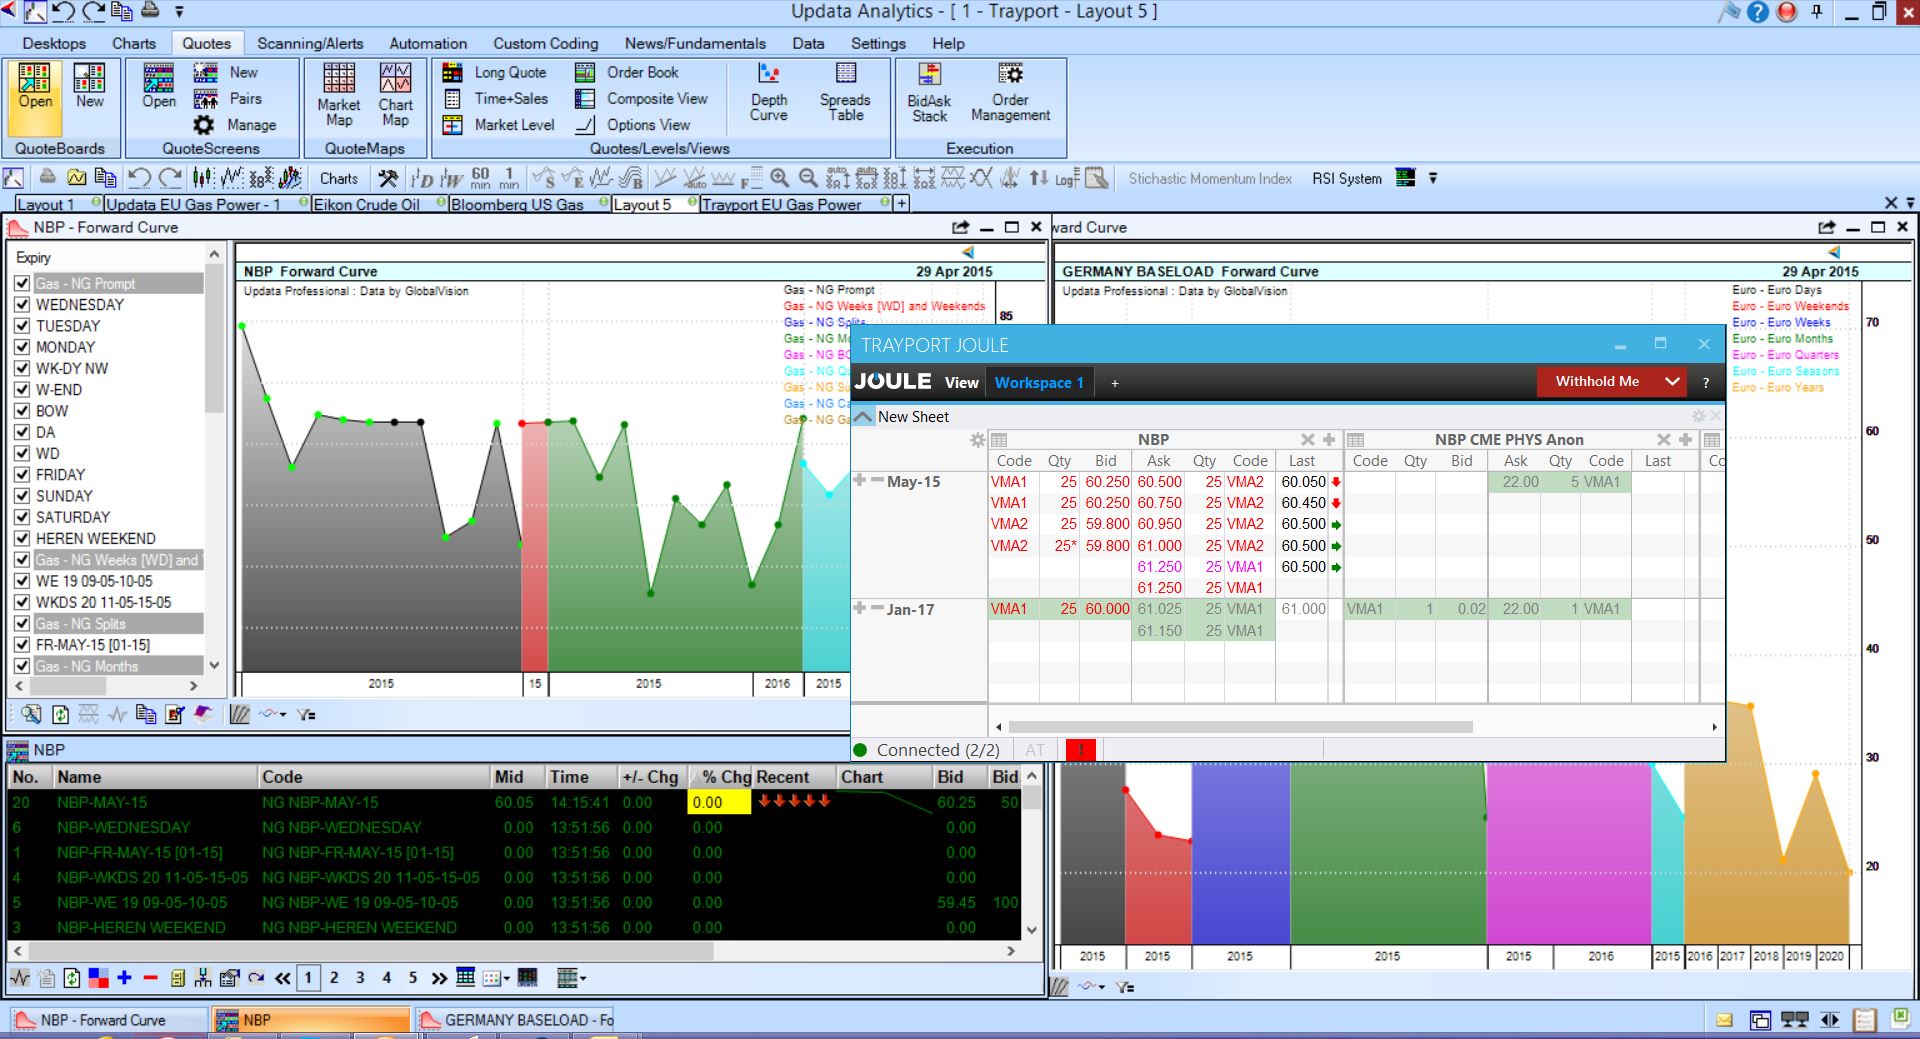 See how energy traders chart data from the Trayport trading platform with Updata